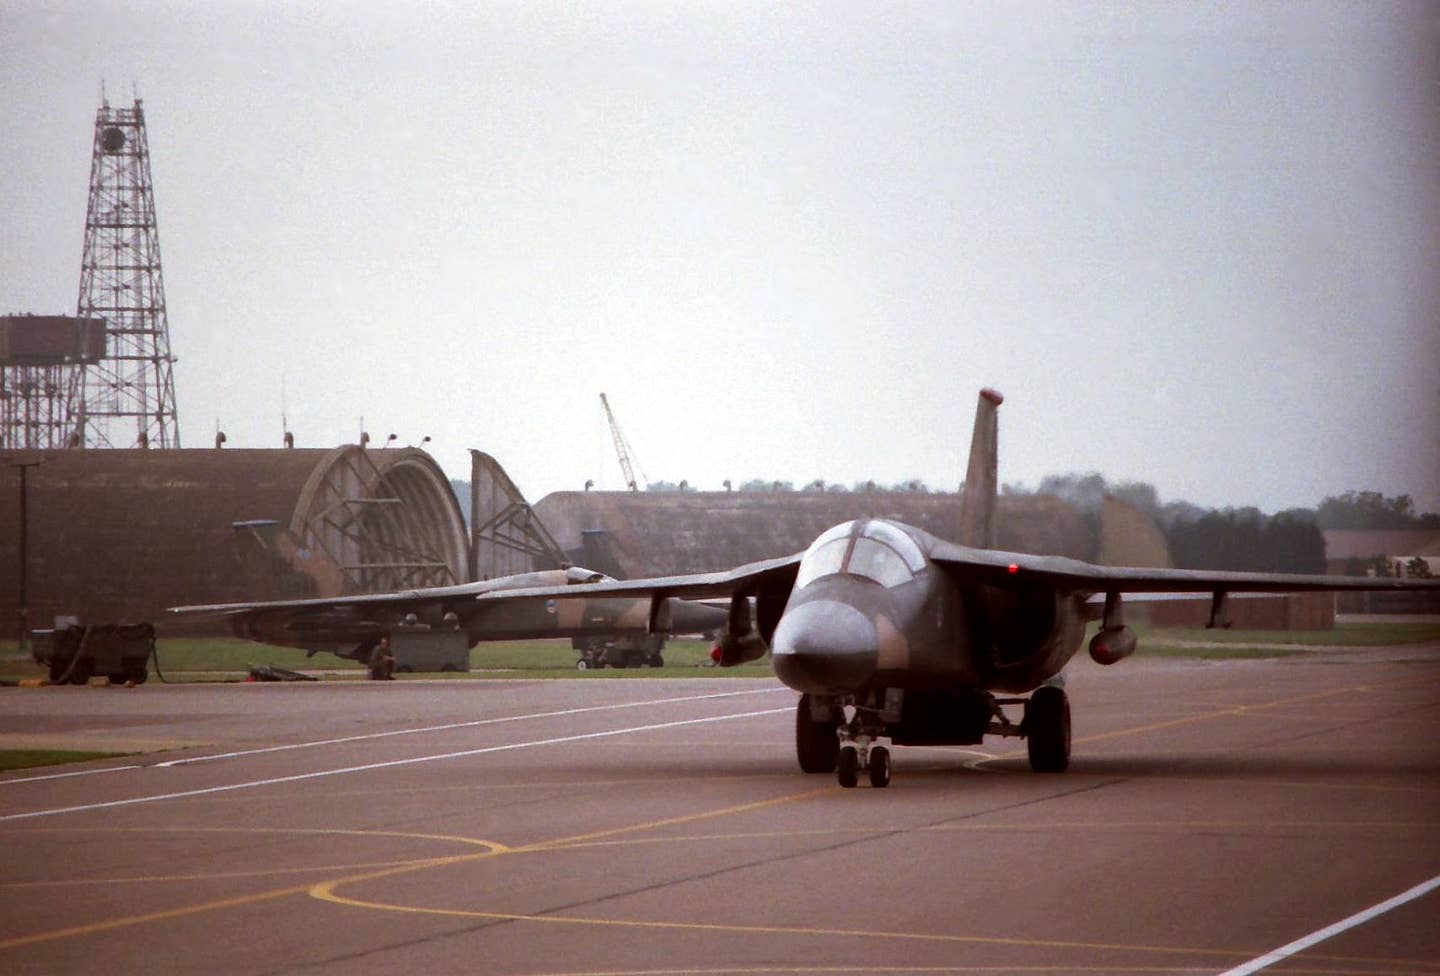 A hot ship: F-111F 70-2376 of the 48th Tactical Fighter Wing at RAF Lakenheath in 1989. <a href=https://www.flickr.com/photos/harryclaggers/33672082400/ target=_blank rel=noreferrer noopener><em>Dick Gilbert via Flickr</em></a>